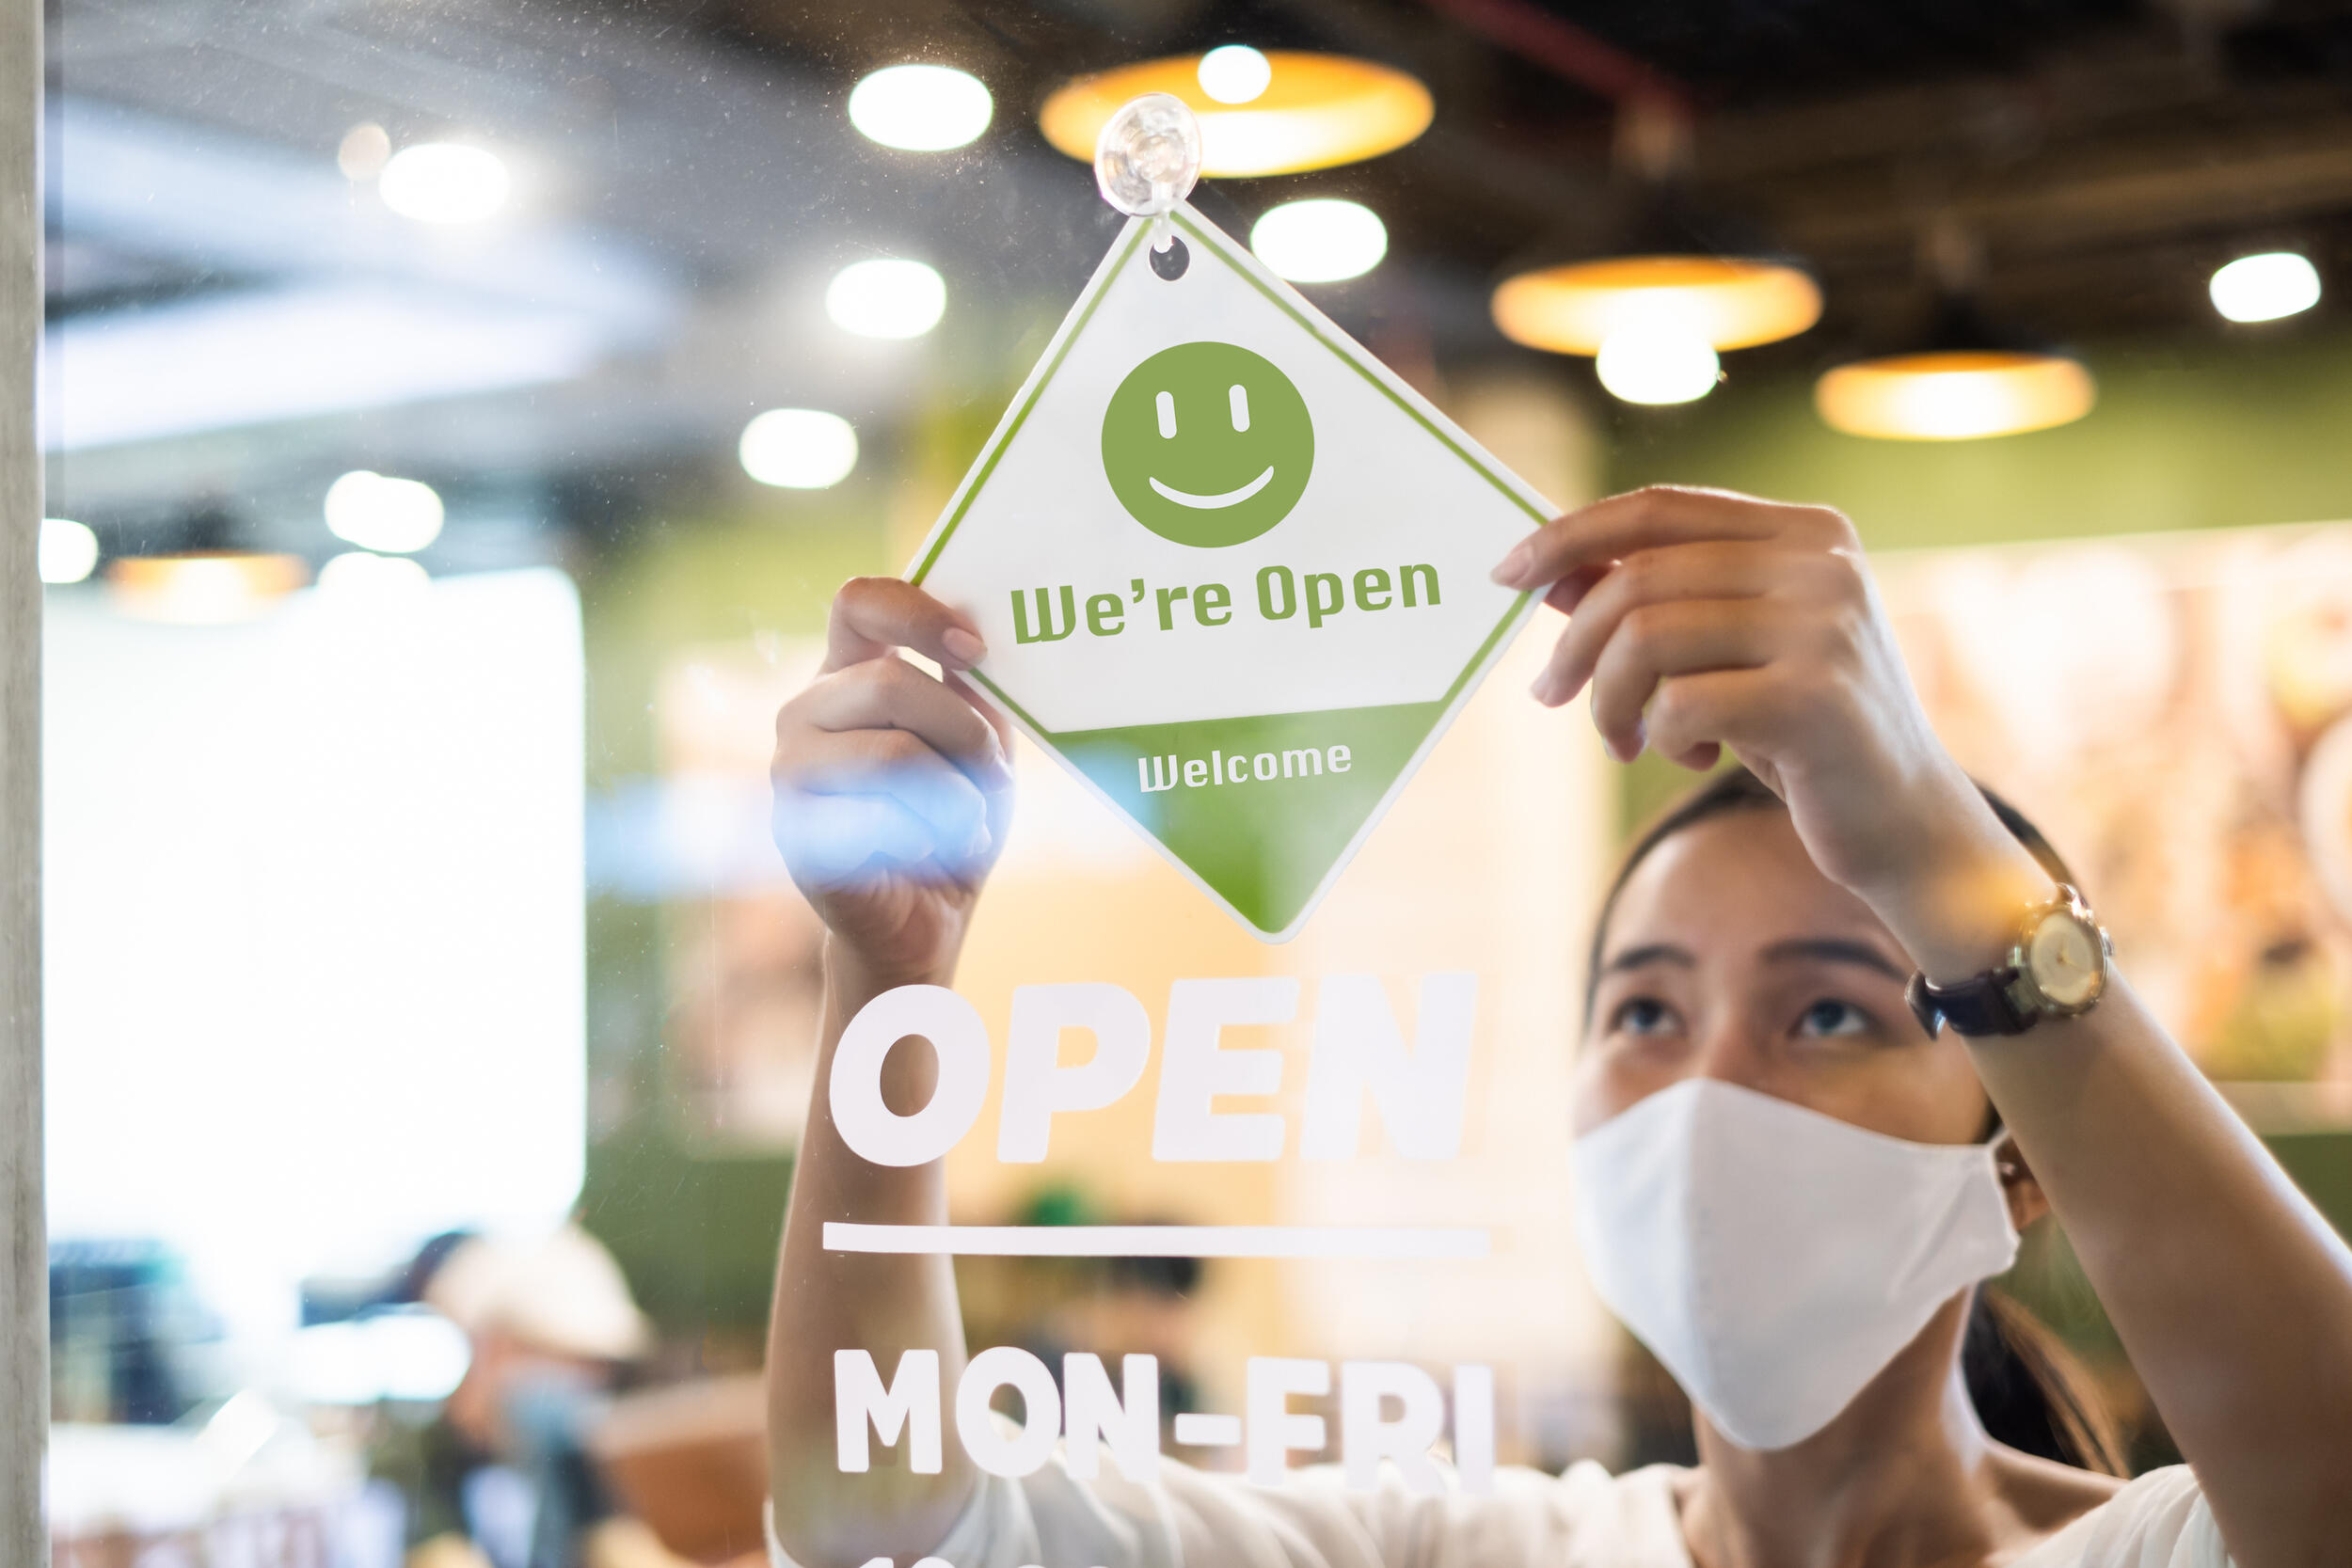 A person wearing a mask hangs a sign indicating a business is open.